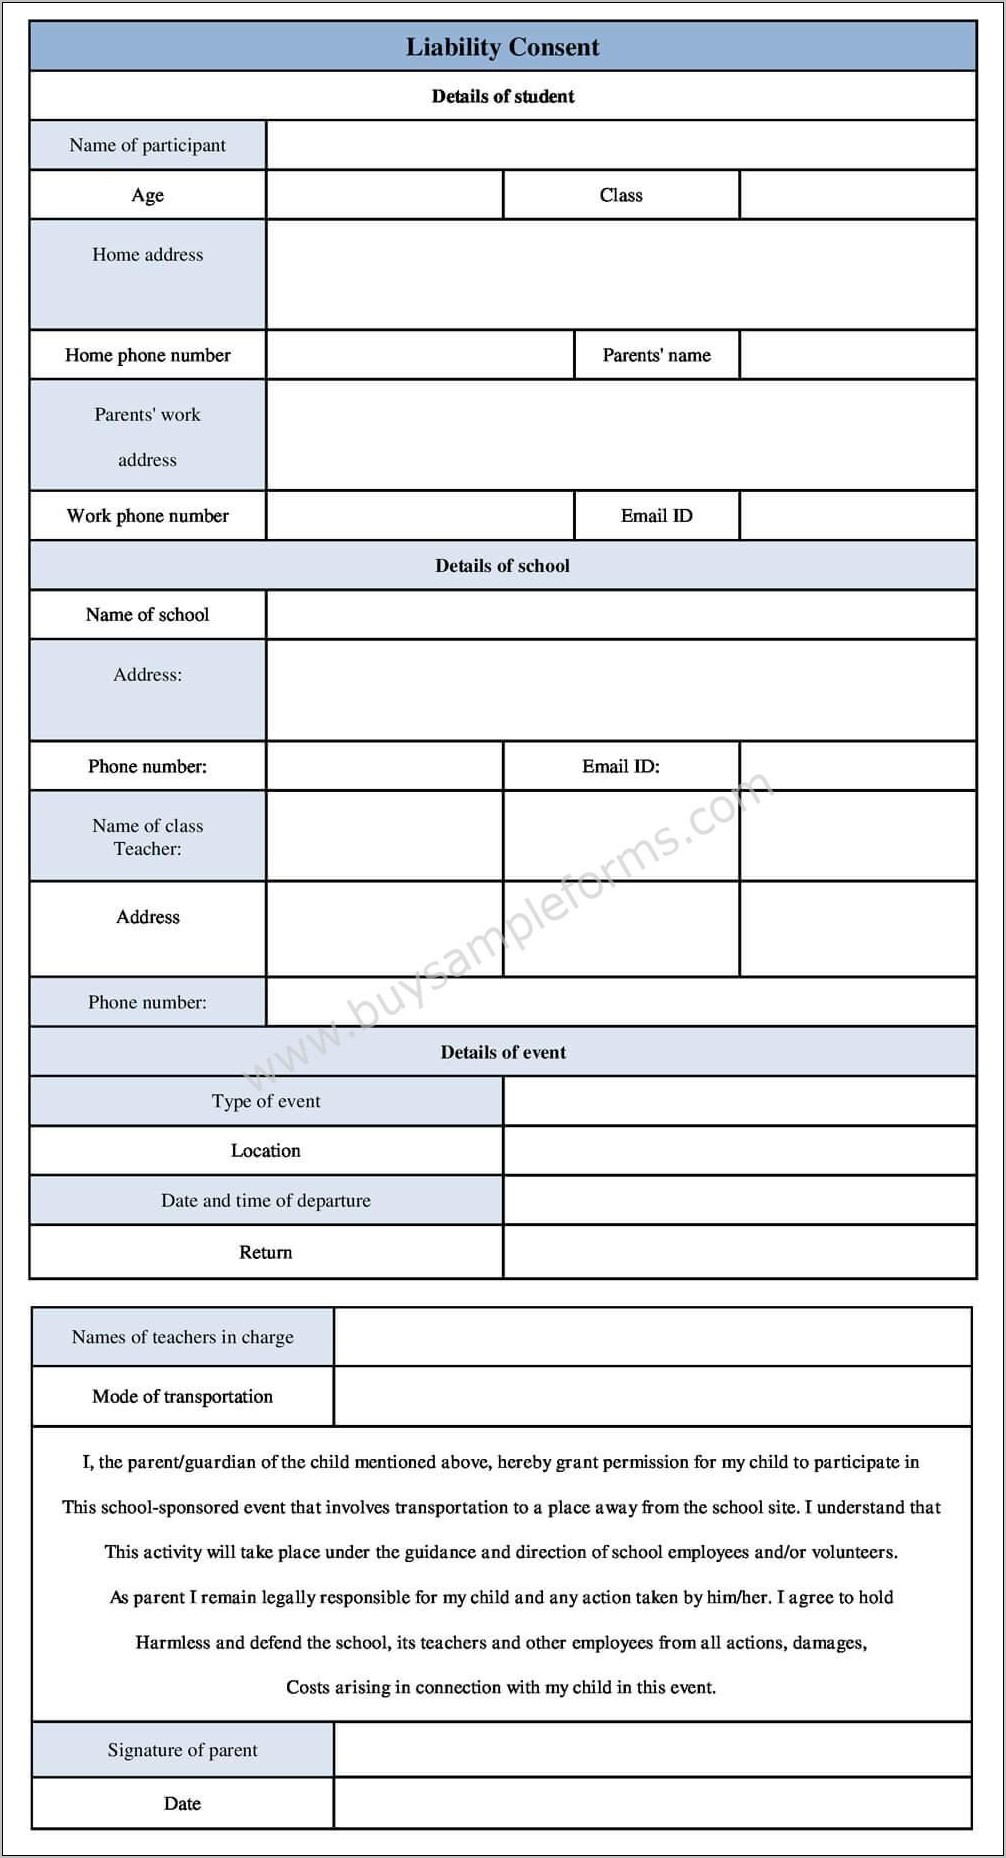 Release Of Liability Form Template Word